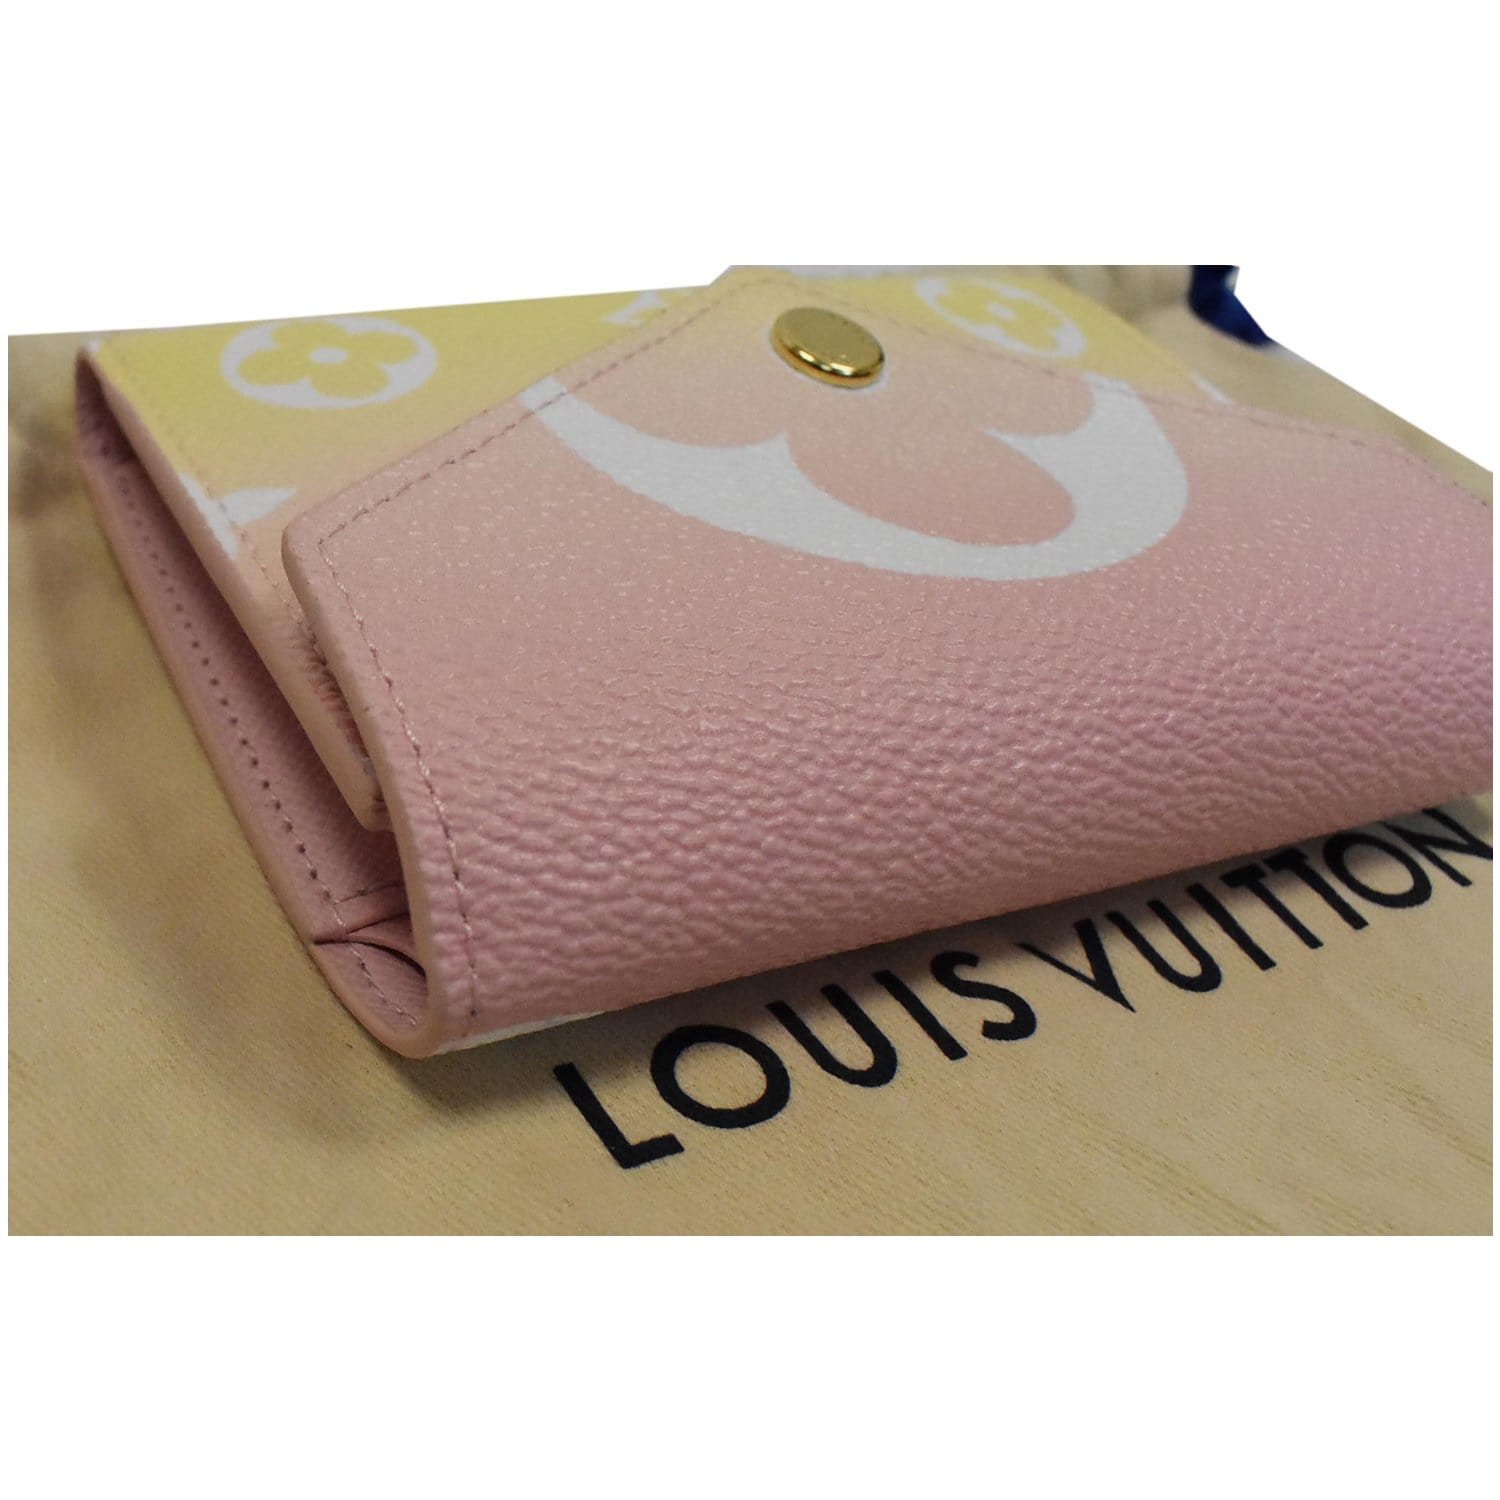 LOUIS VUITTON Monogram Giant By The Pool Victorine Wallet Light Pink 763259